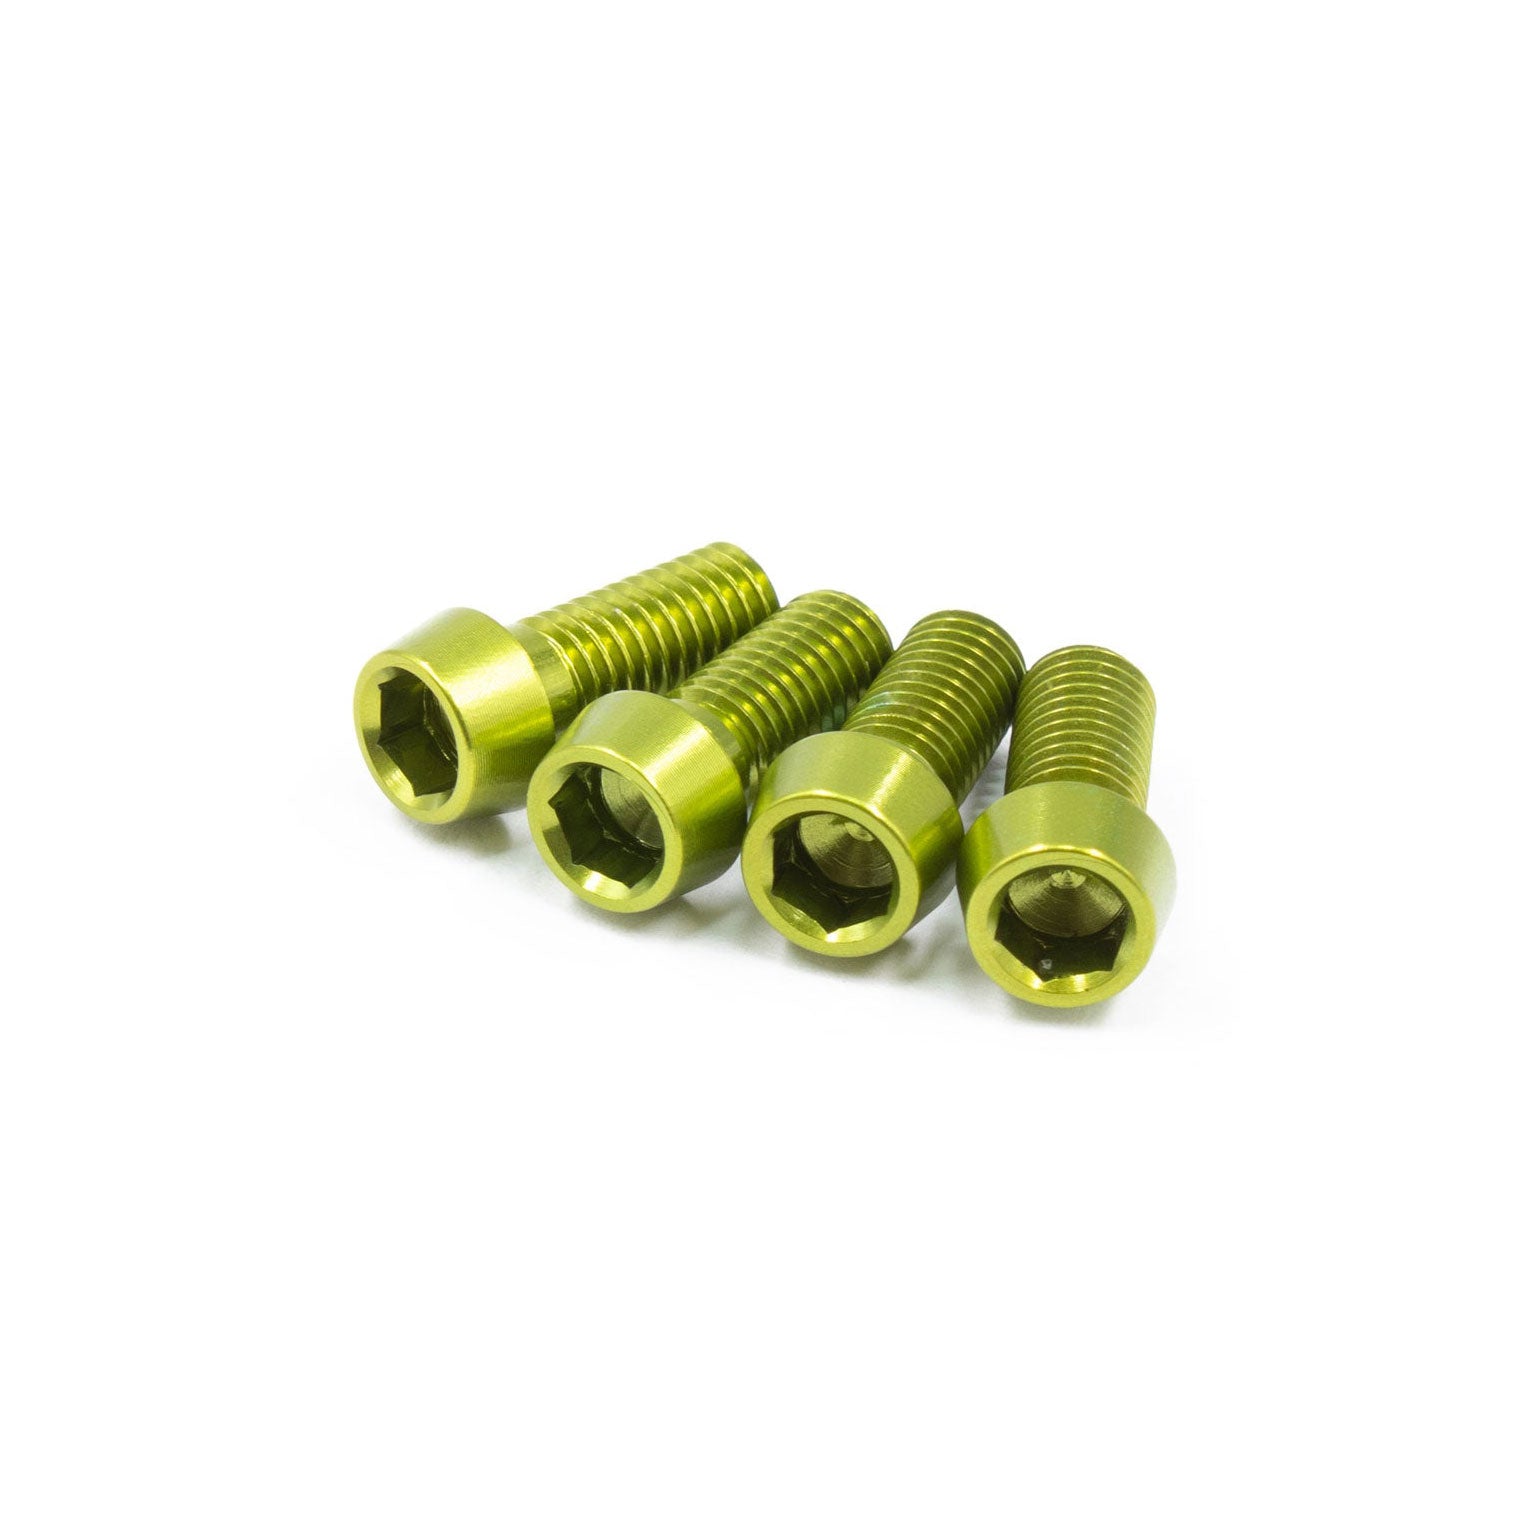 Acid green, ultra lightweight set of bolts for bicycle bottle cages